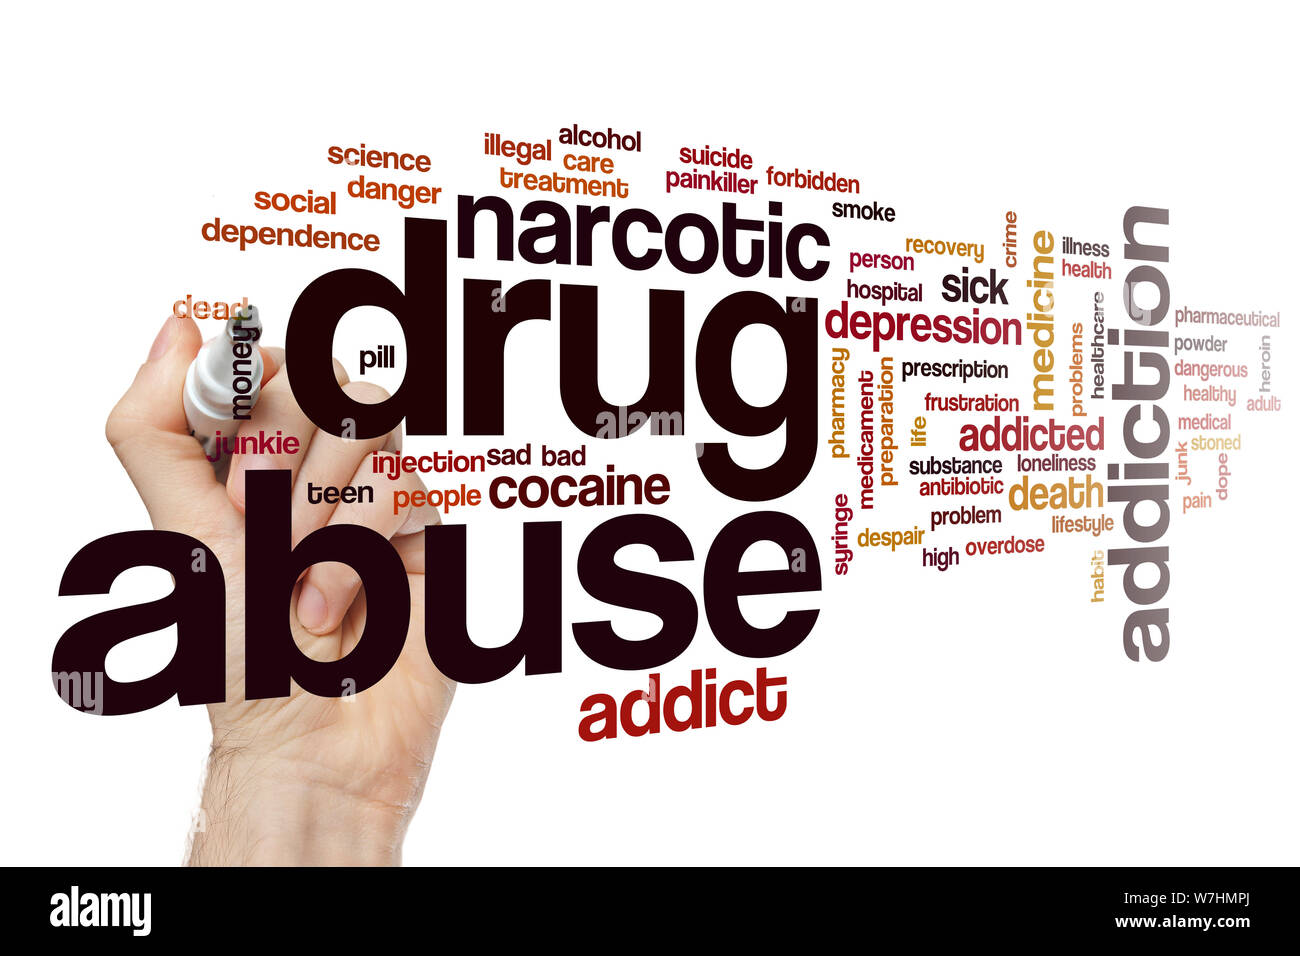 Drug abuse word cloud concept Stock Photo